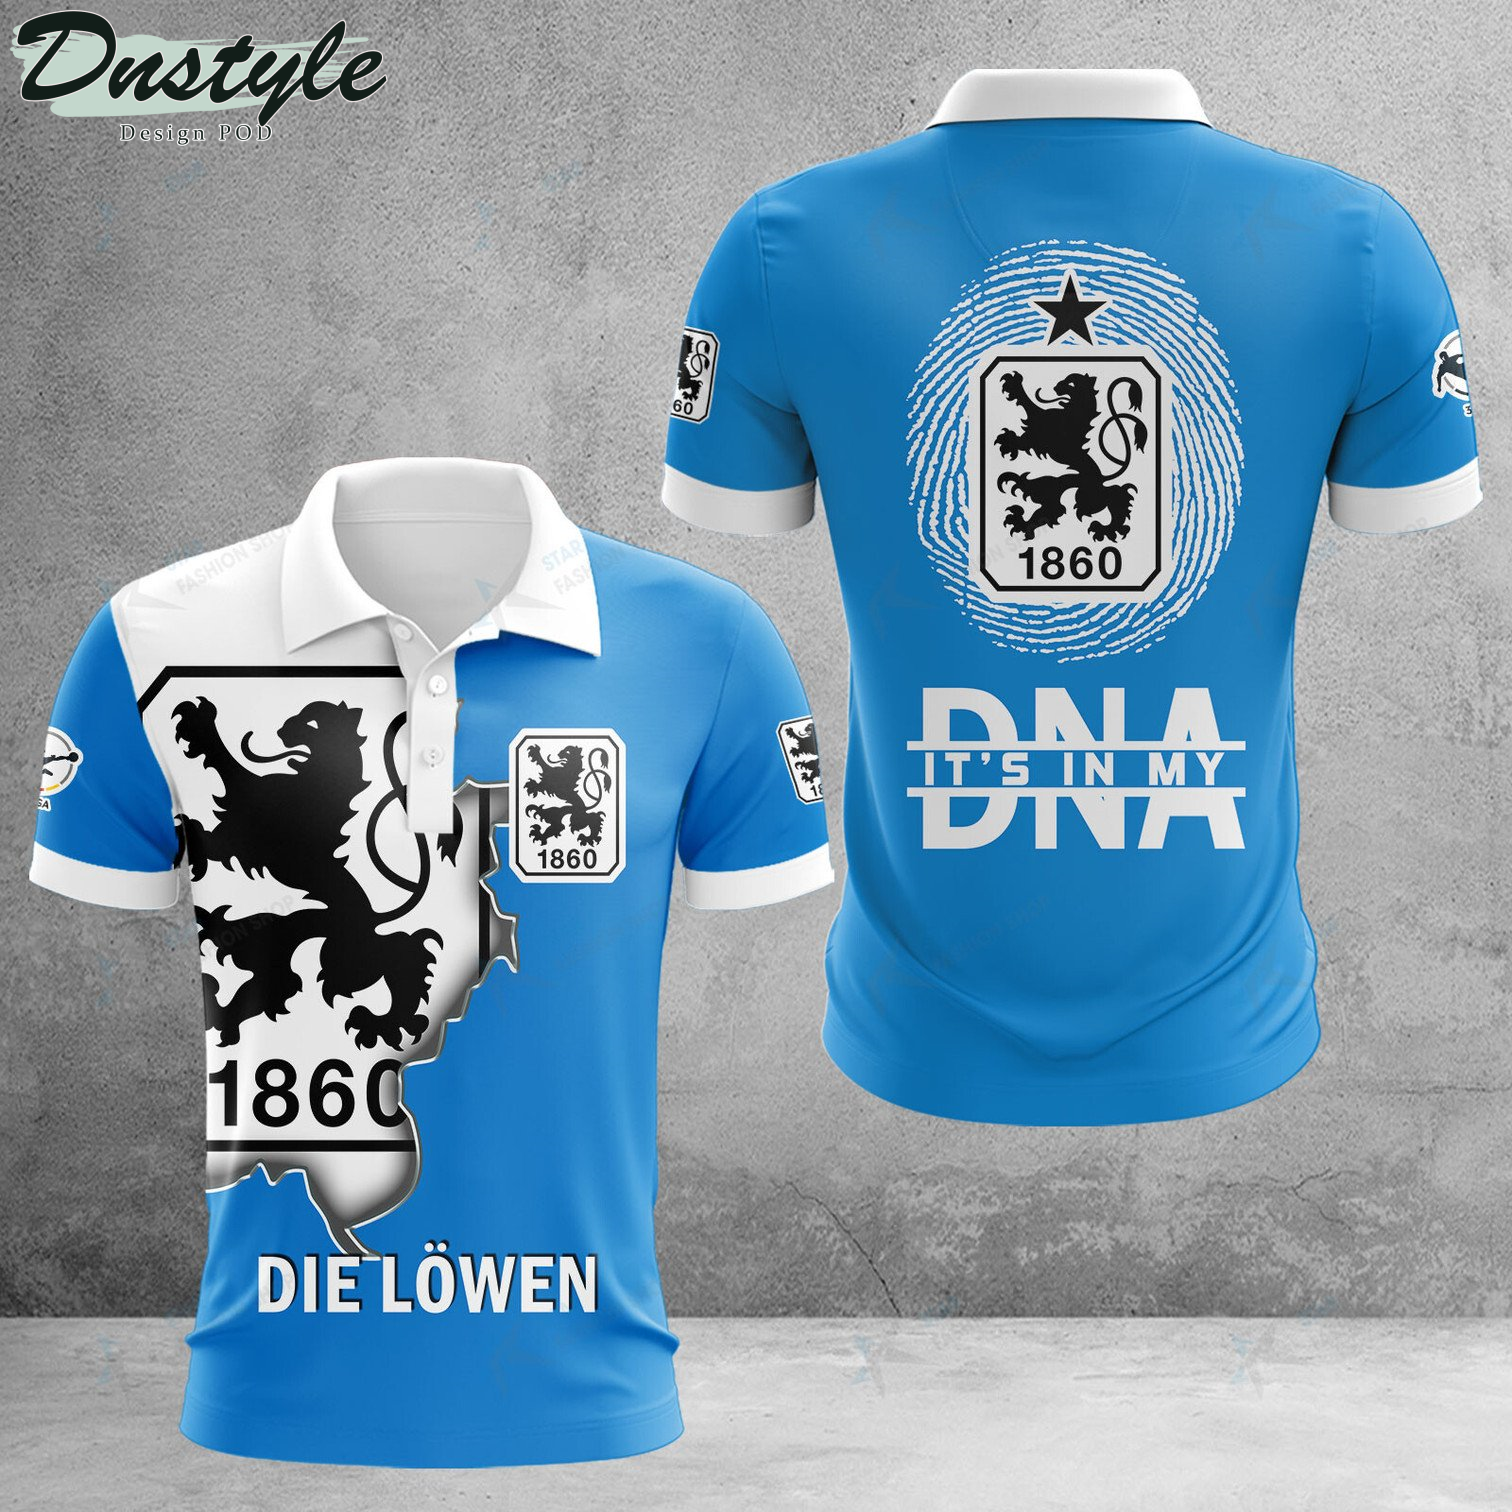 1860 Munich it's in my DNA polo shirt